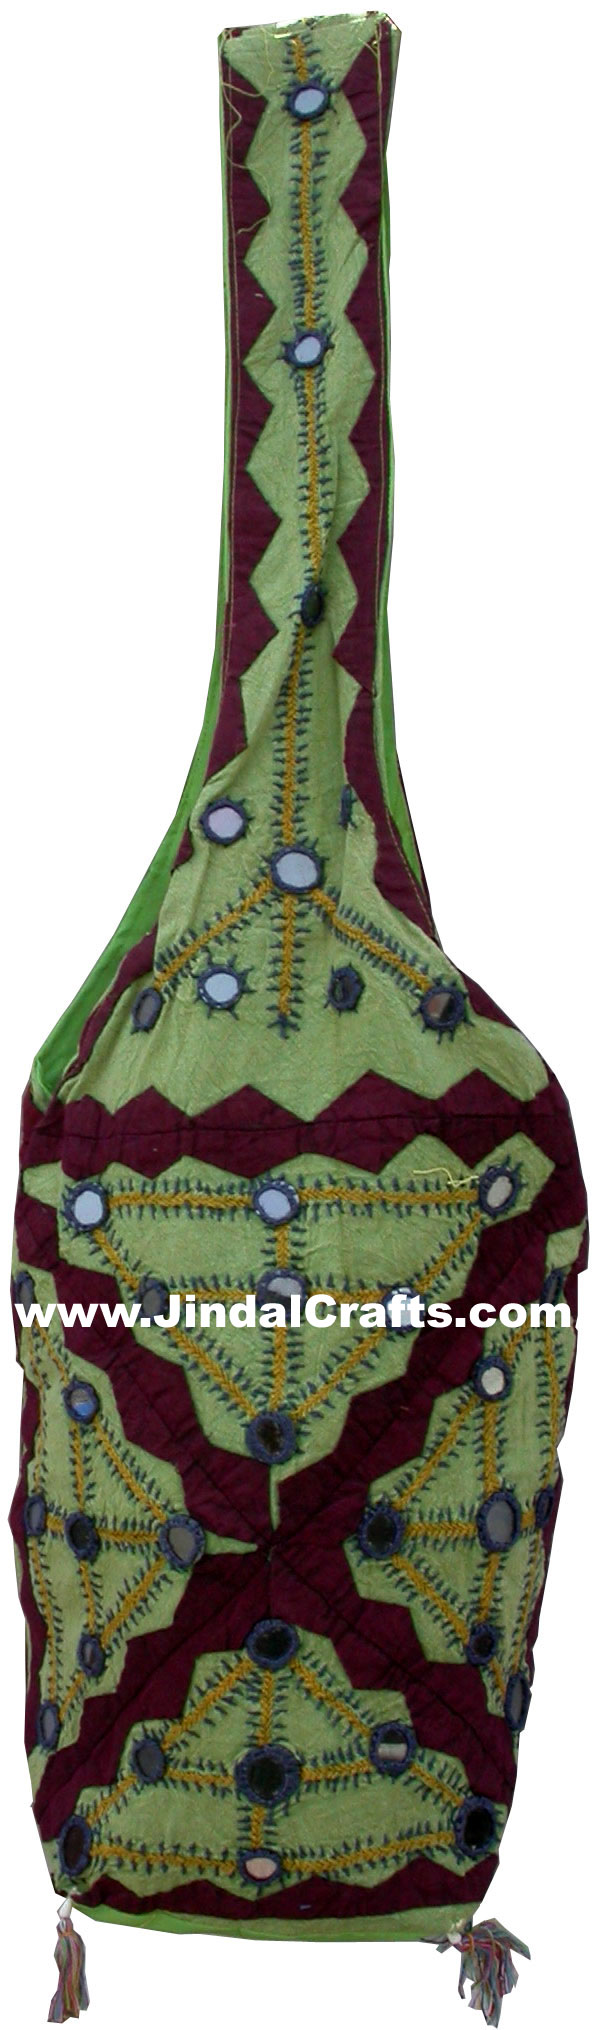 Colourful Hand Embroidered Mirror Handbag from India 100 % Cotton Fabric Art